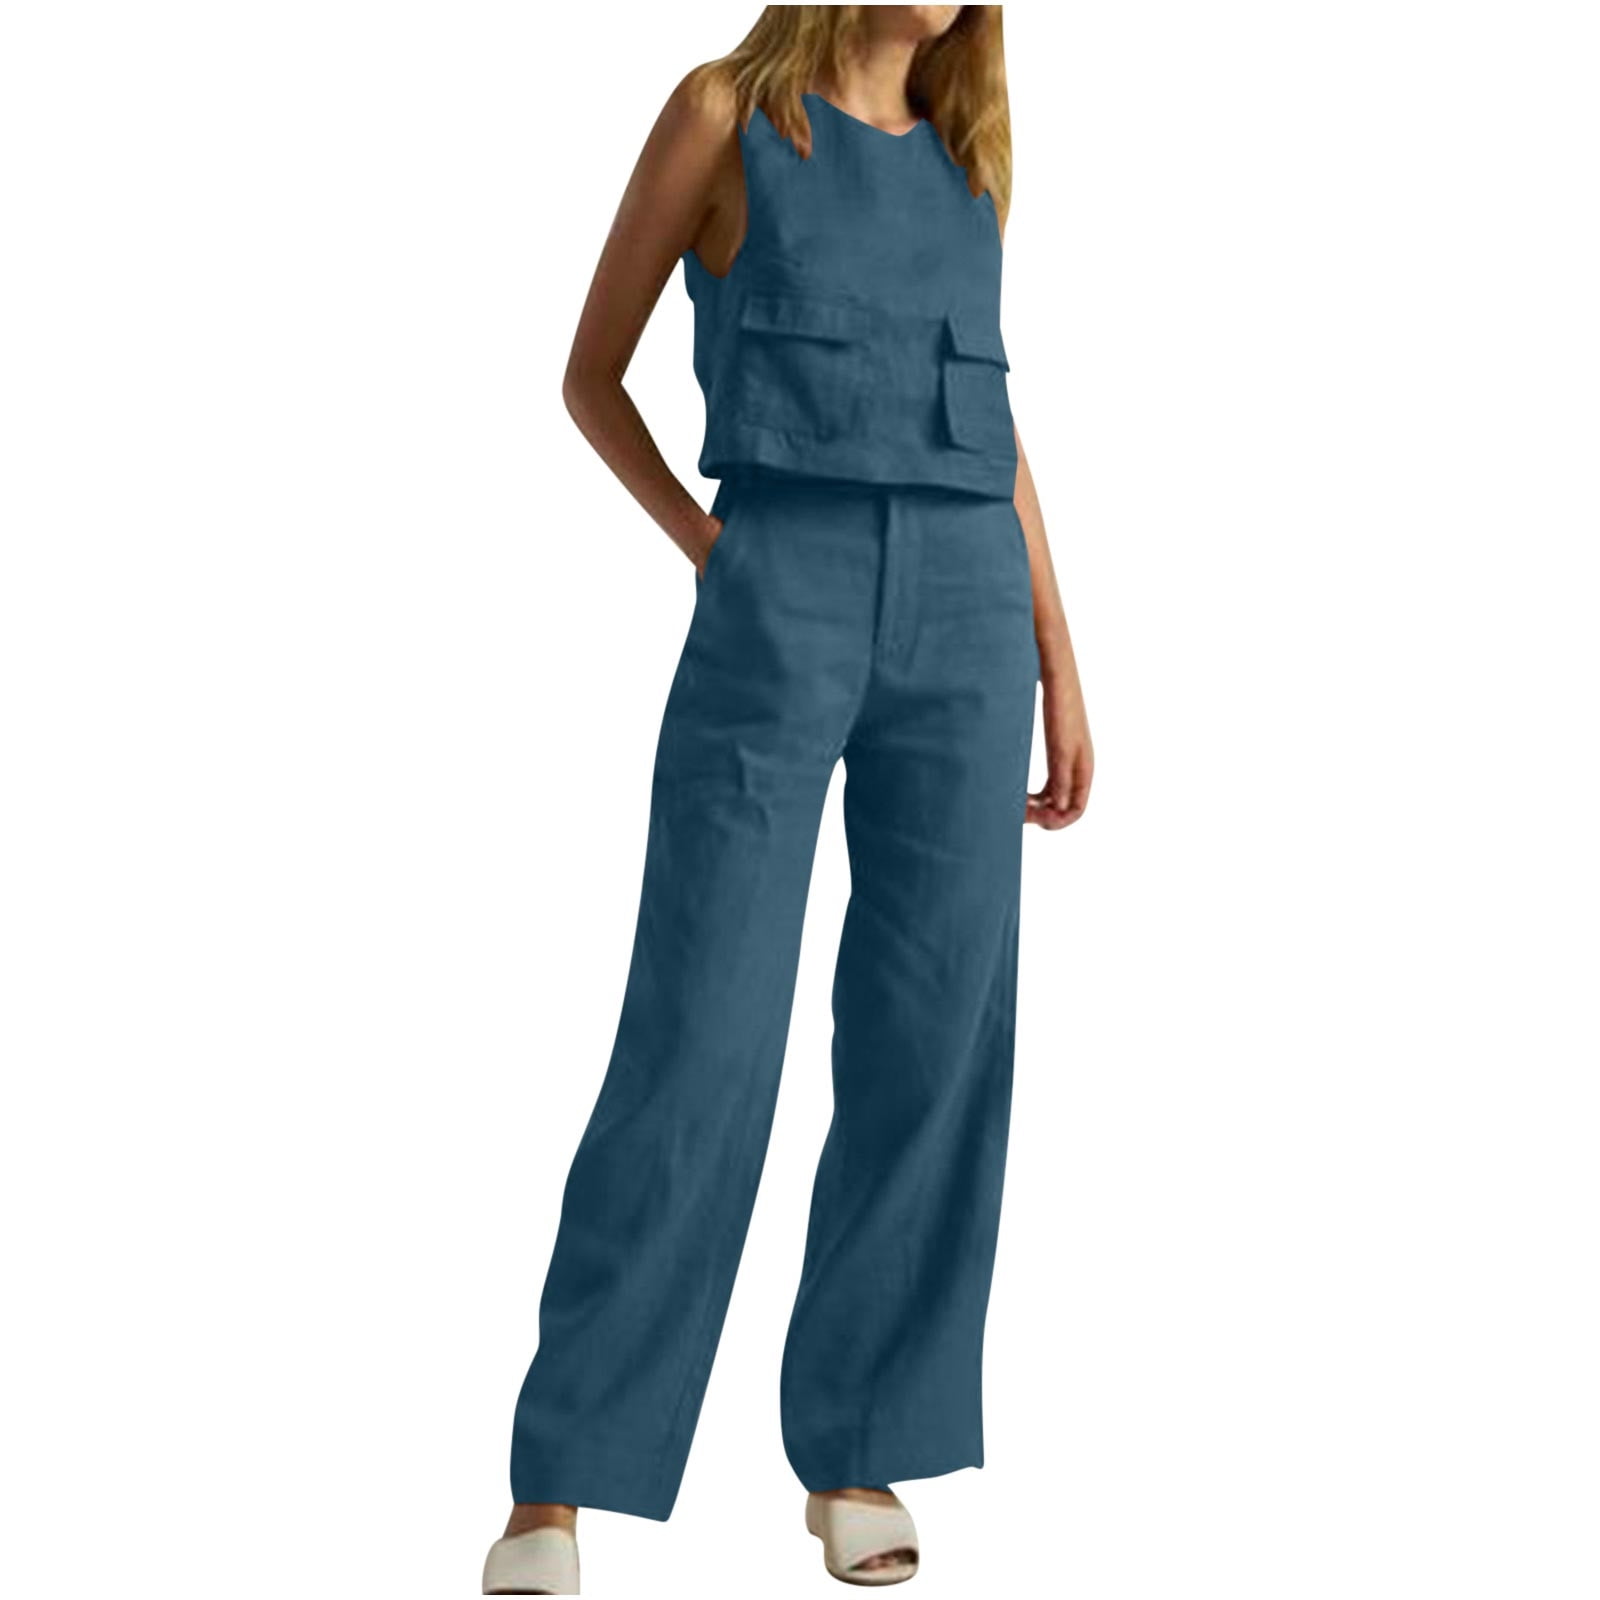 REORIAFEE Casual Outfits for Women Comfy Vacation Tacksuit 90s Themed Party  Outfits 2PC Fashion Women's V Neck Sleeveless Top + Loose Pocket Pants Suit  Navy L 